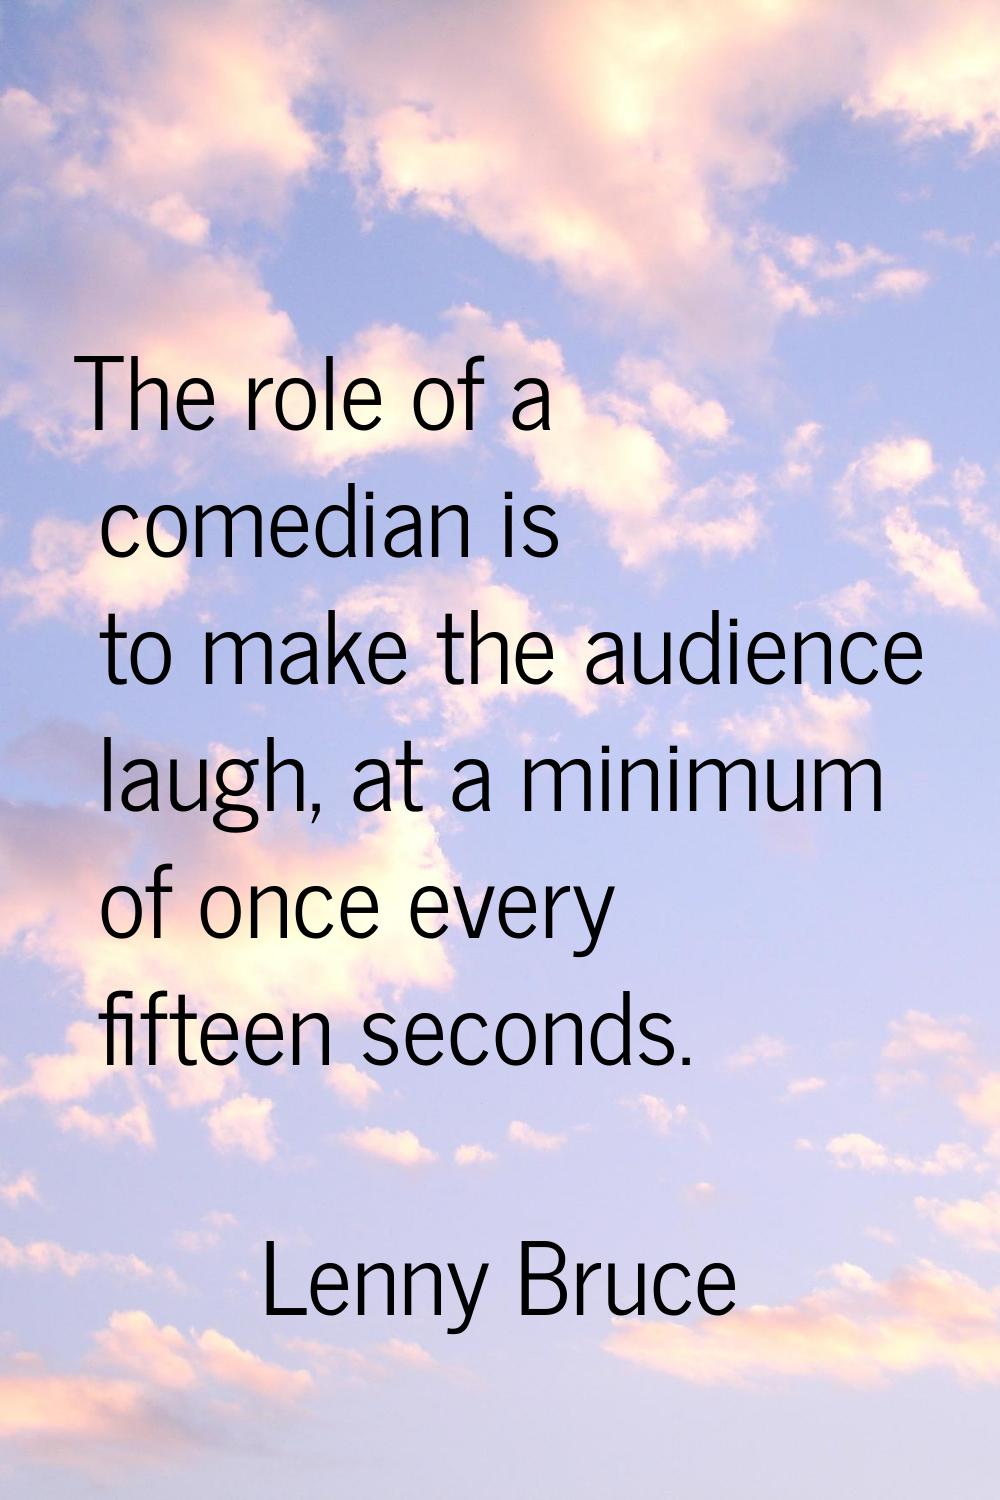 The role of a comedian is to make the audience laugh, at a minimum of once every fifteen seconds.